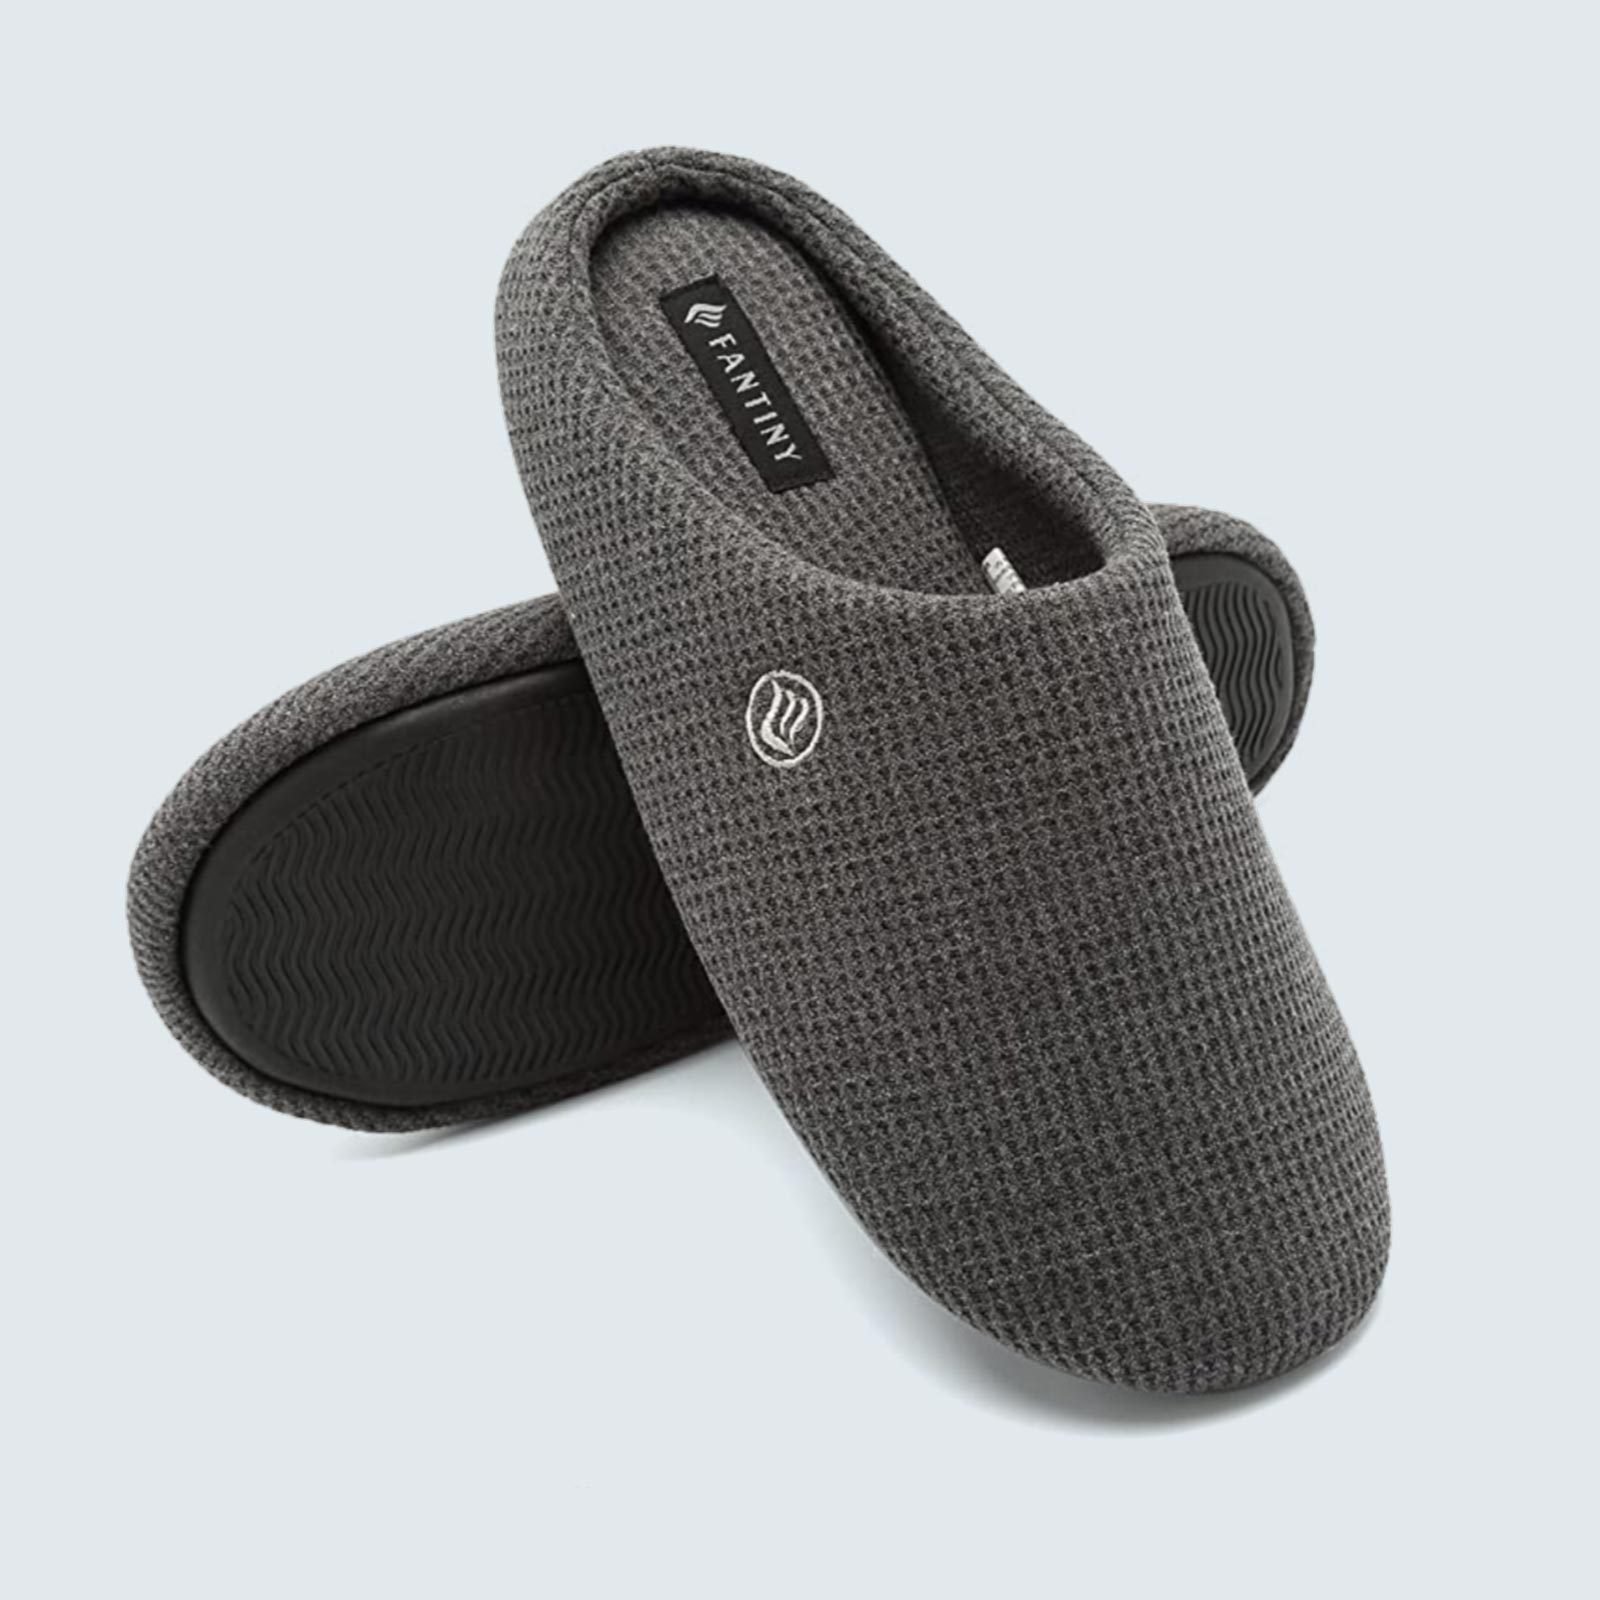 Mens Slippers: The Best Styles In 2022